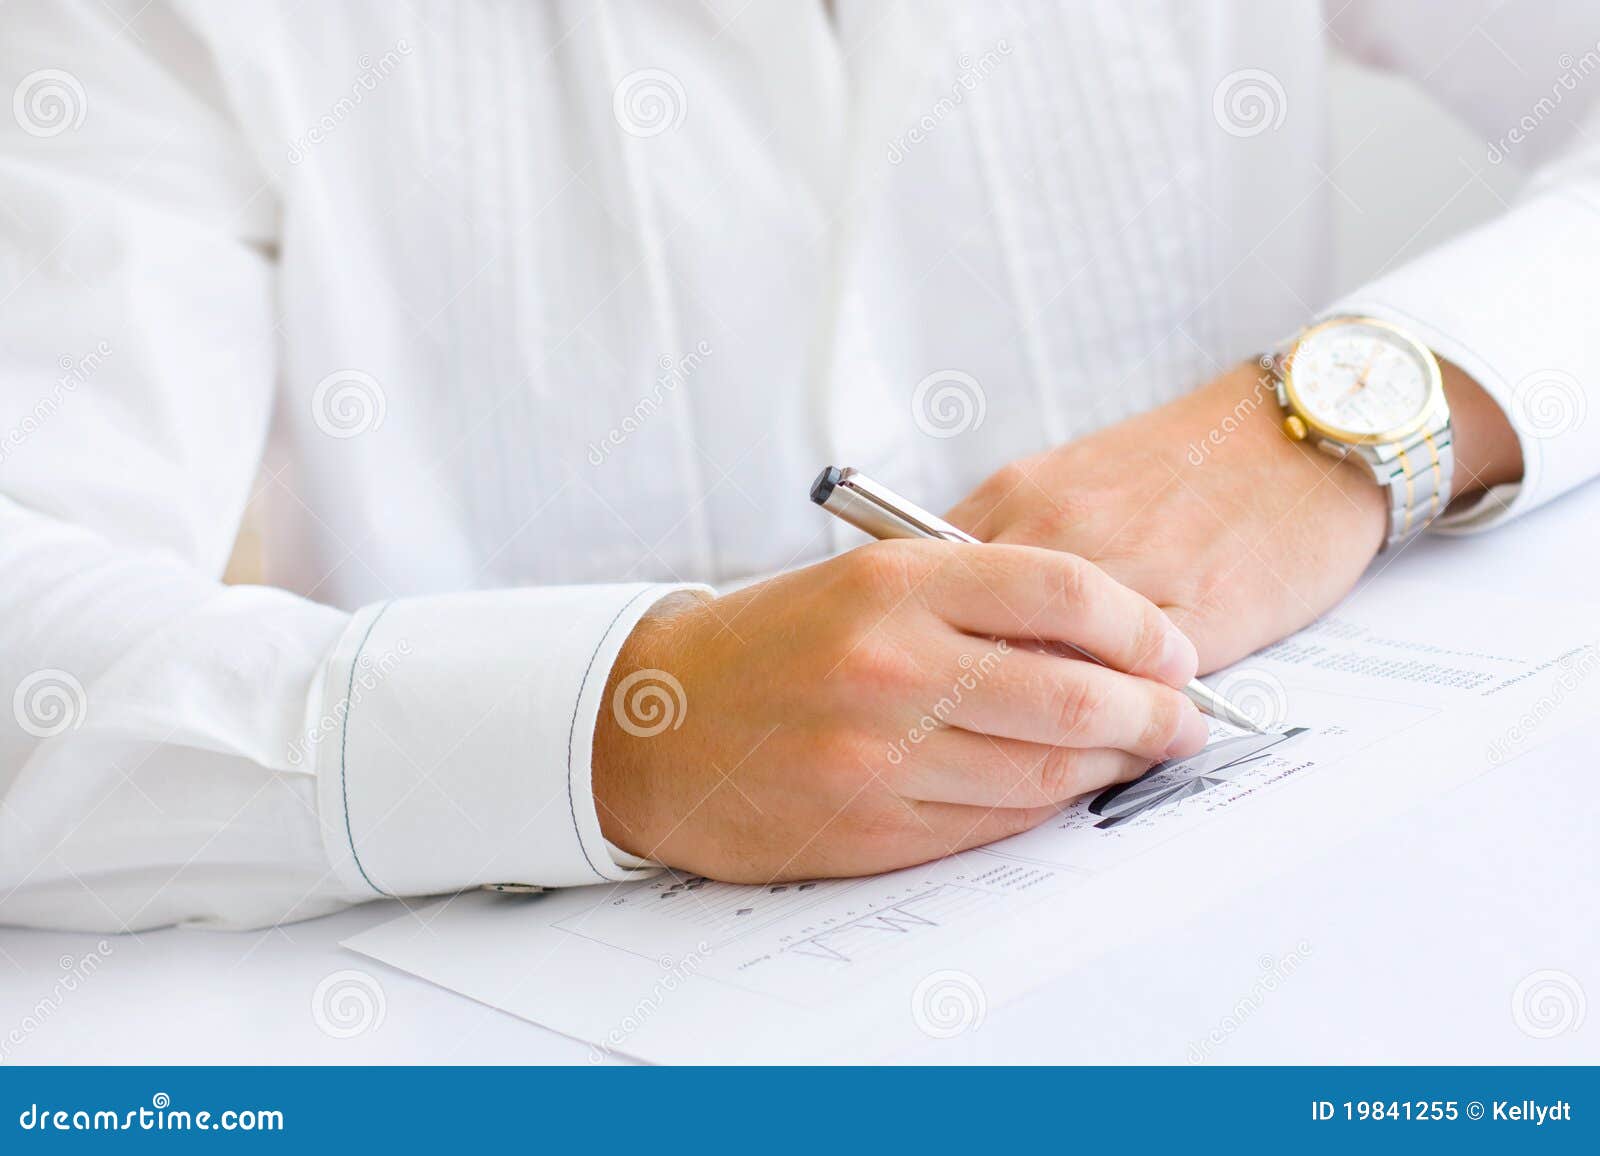 business man analysing graph and making notes